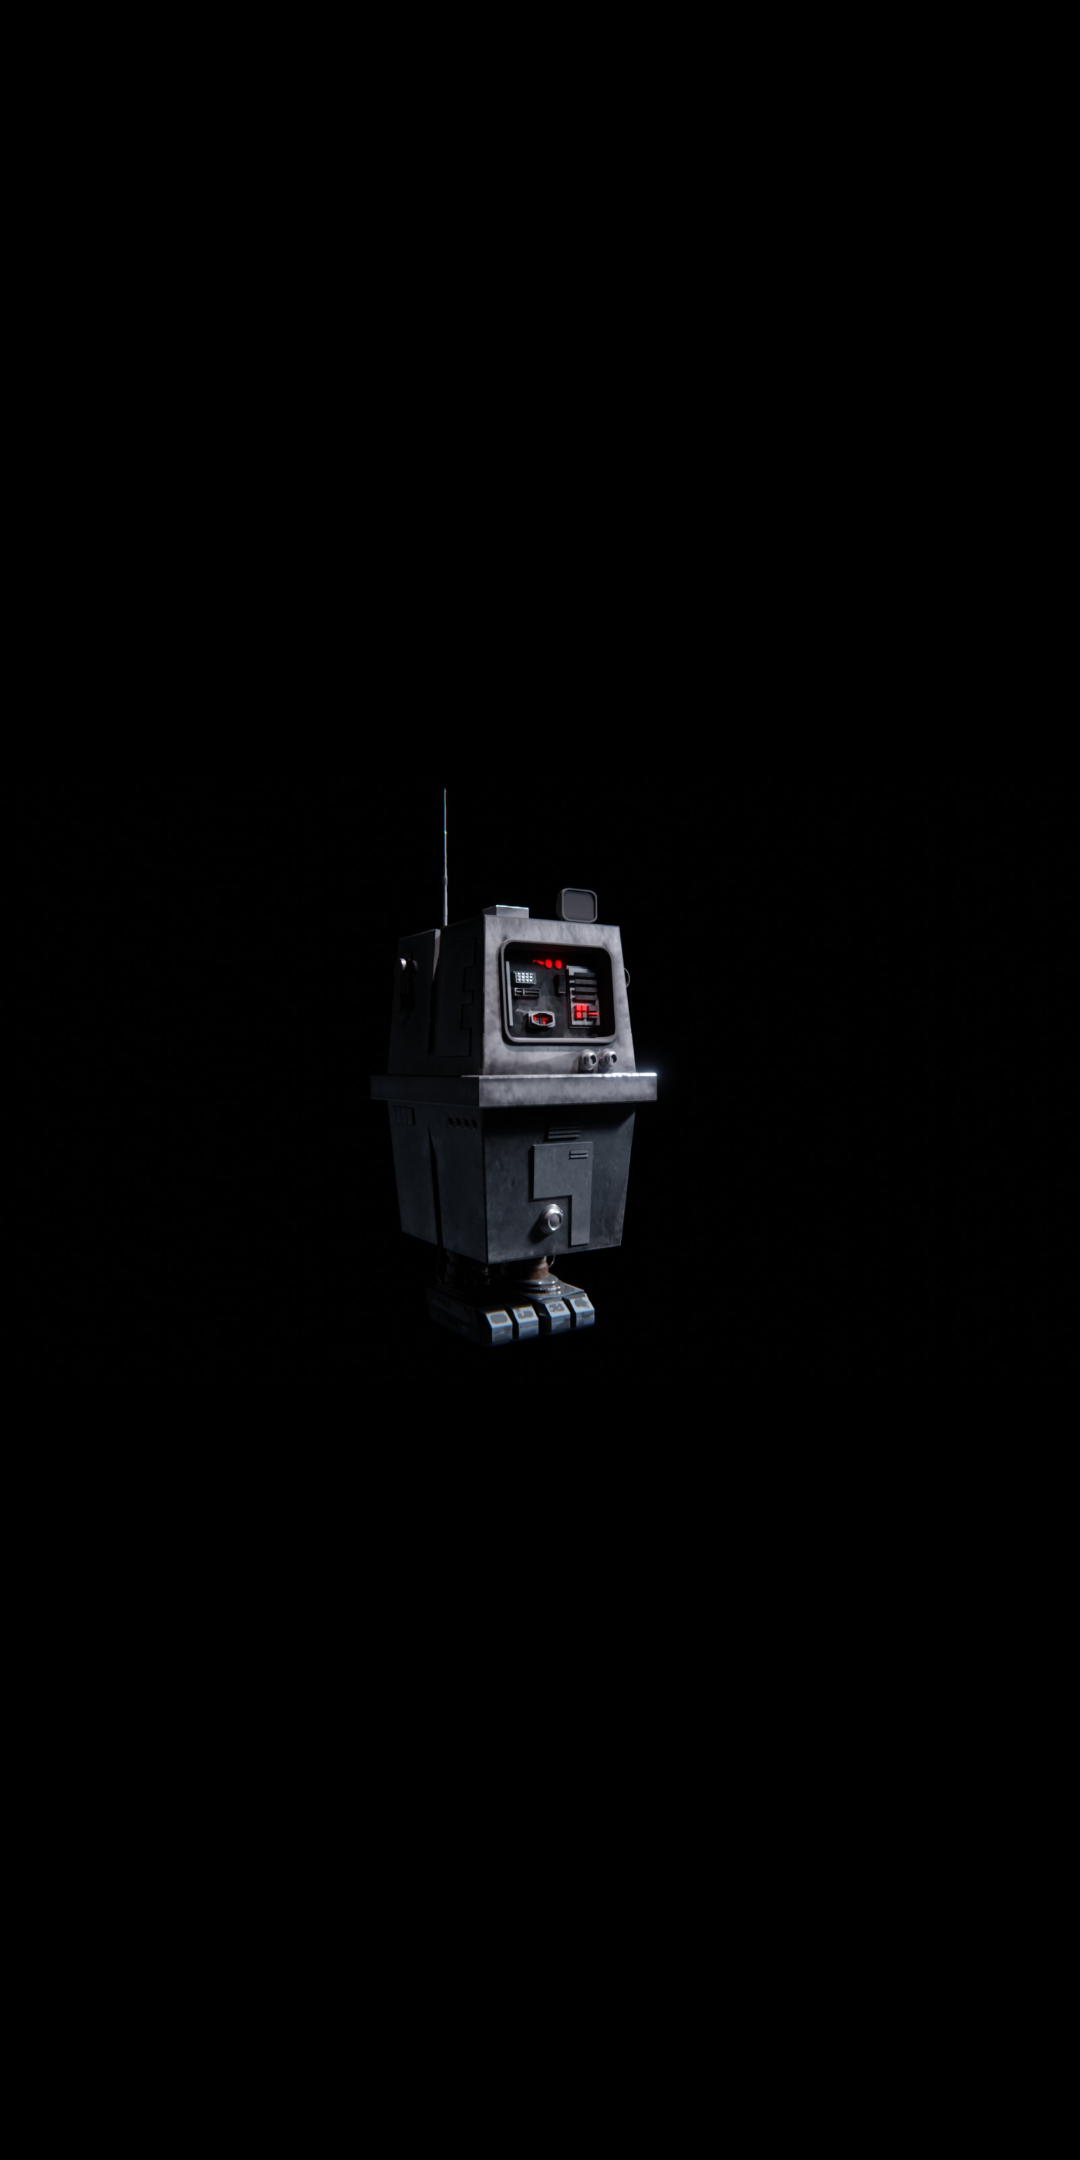 GONK! I took this render. Feel free to use for phone wallpaper or smt